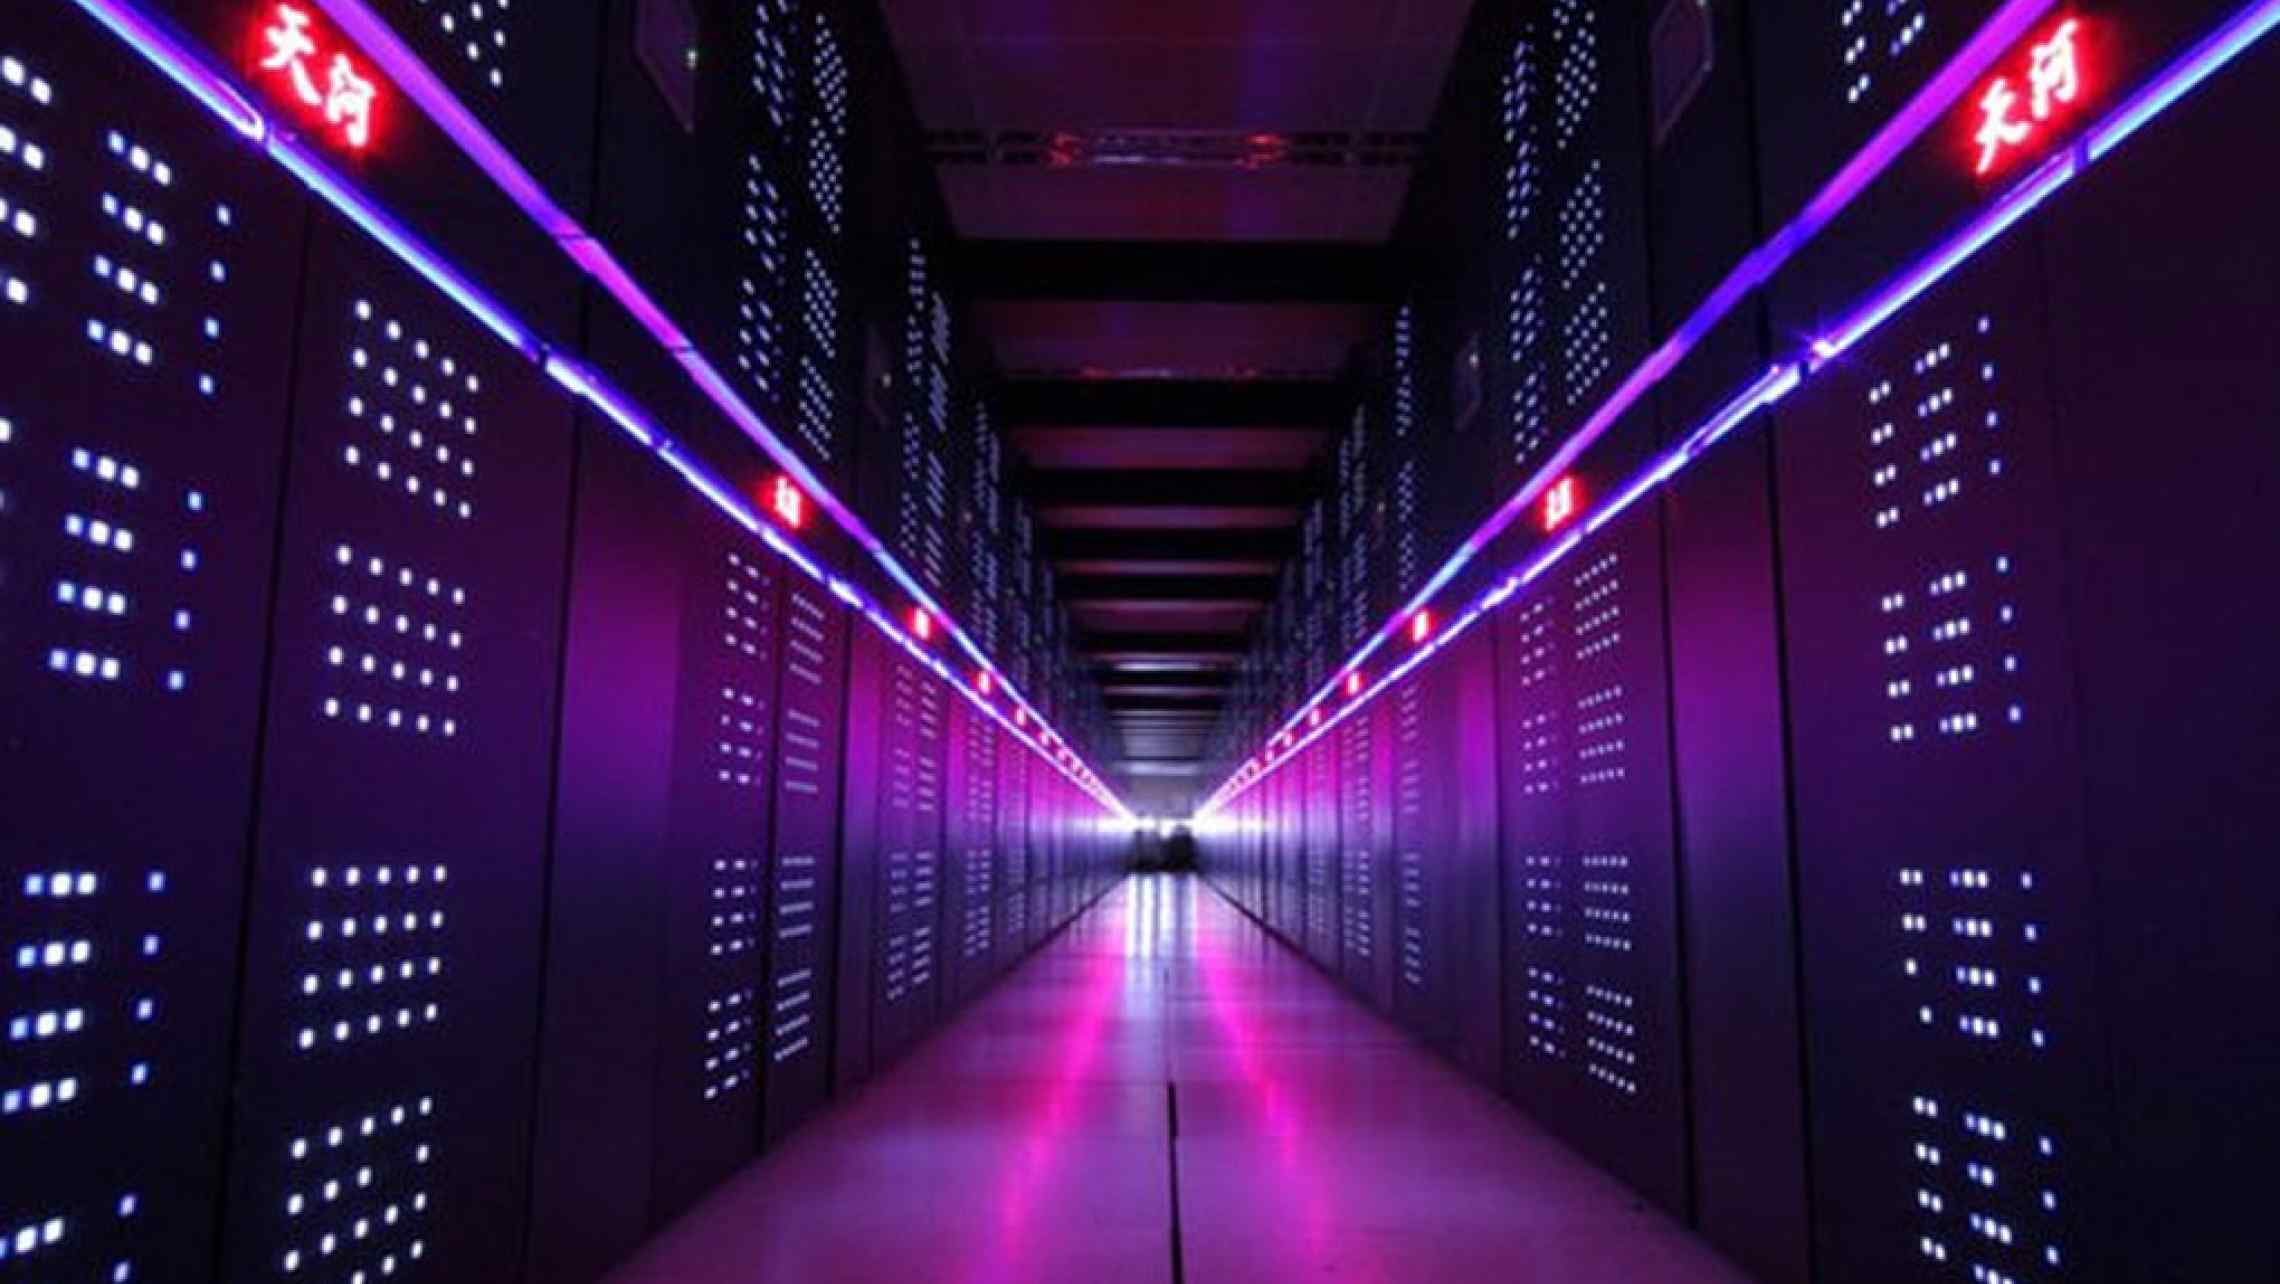 SUPERCOMPUTERS COULD HELP EXTEND HUMAN LIFE EXPECTANCY BY A DECADE